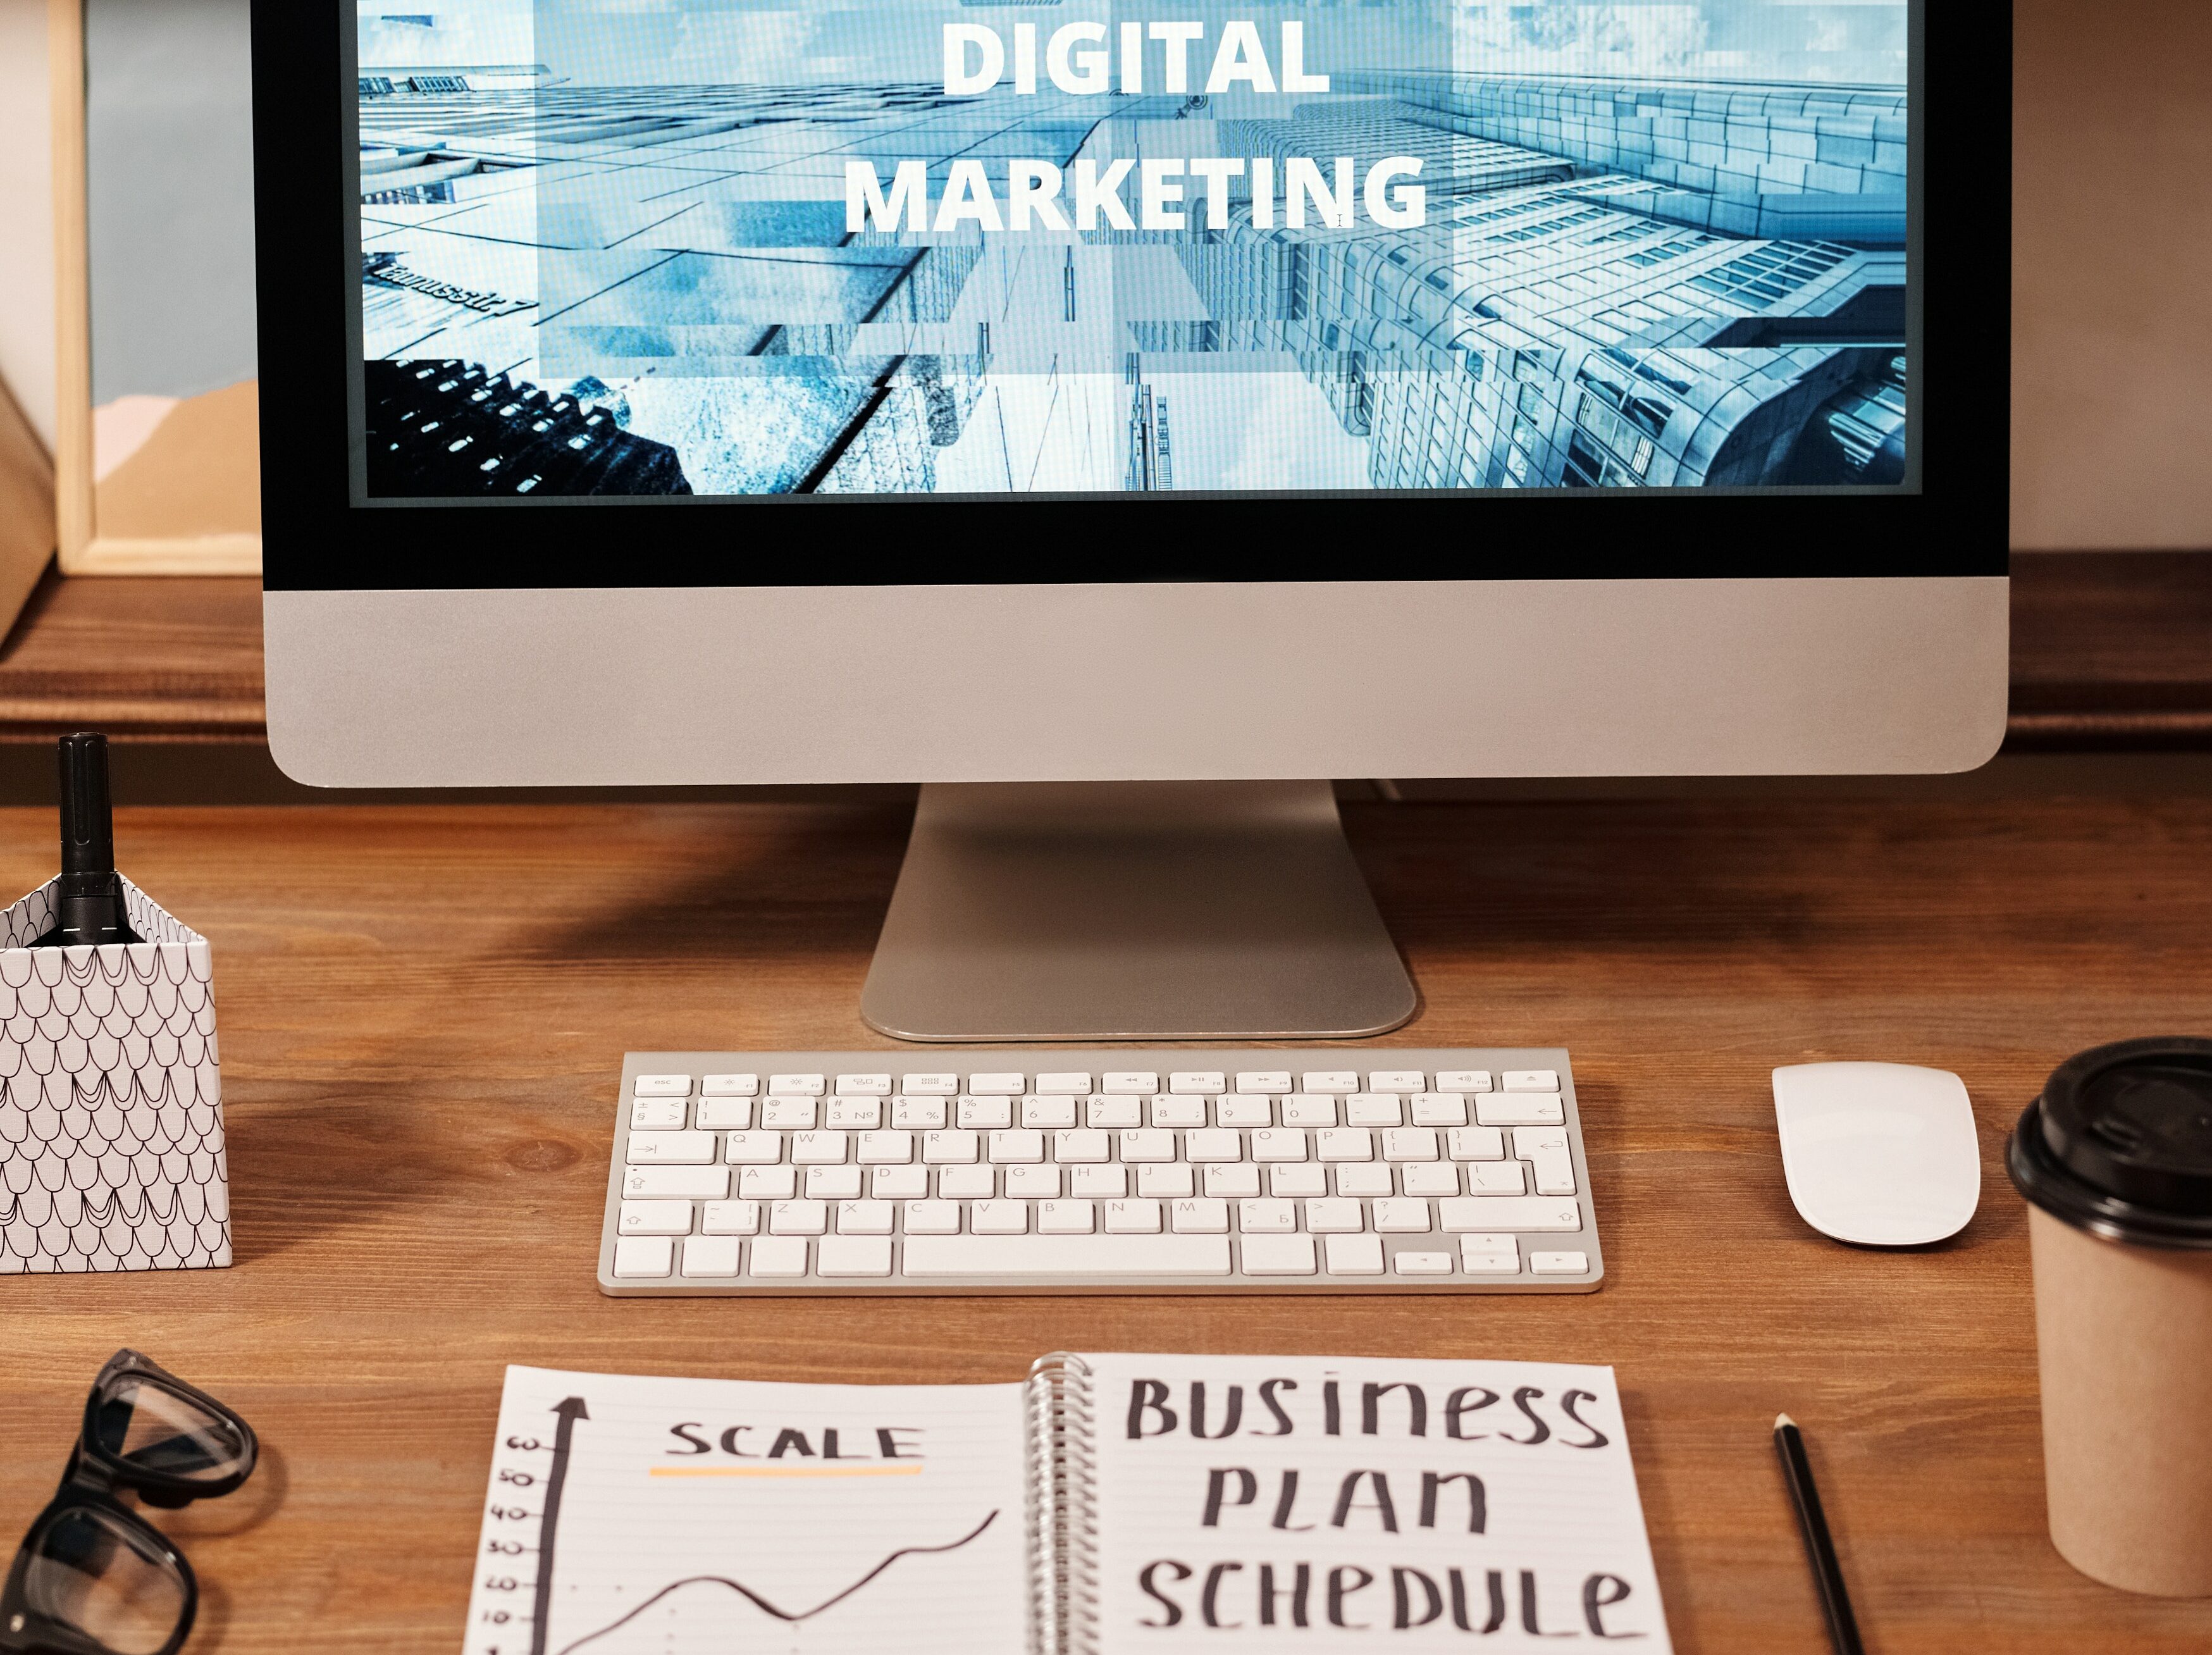 Turn your passion into profit. A Mac screen displaying the text 'Digital Marketing' and a notepad with 'Business Plan' written on it,